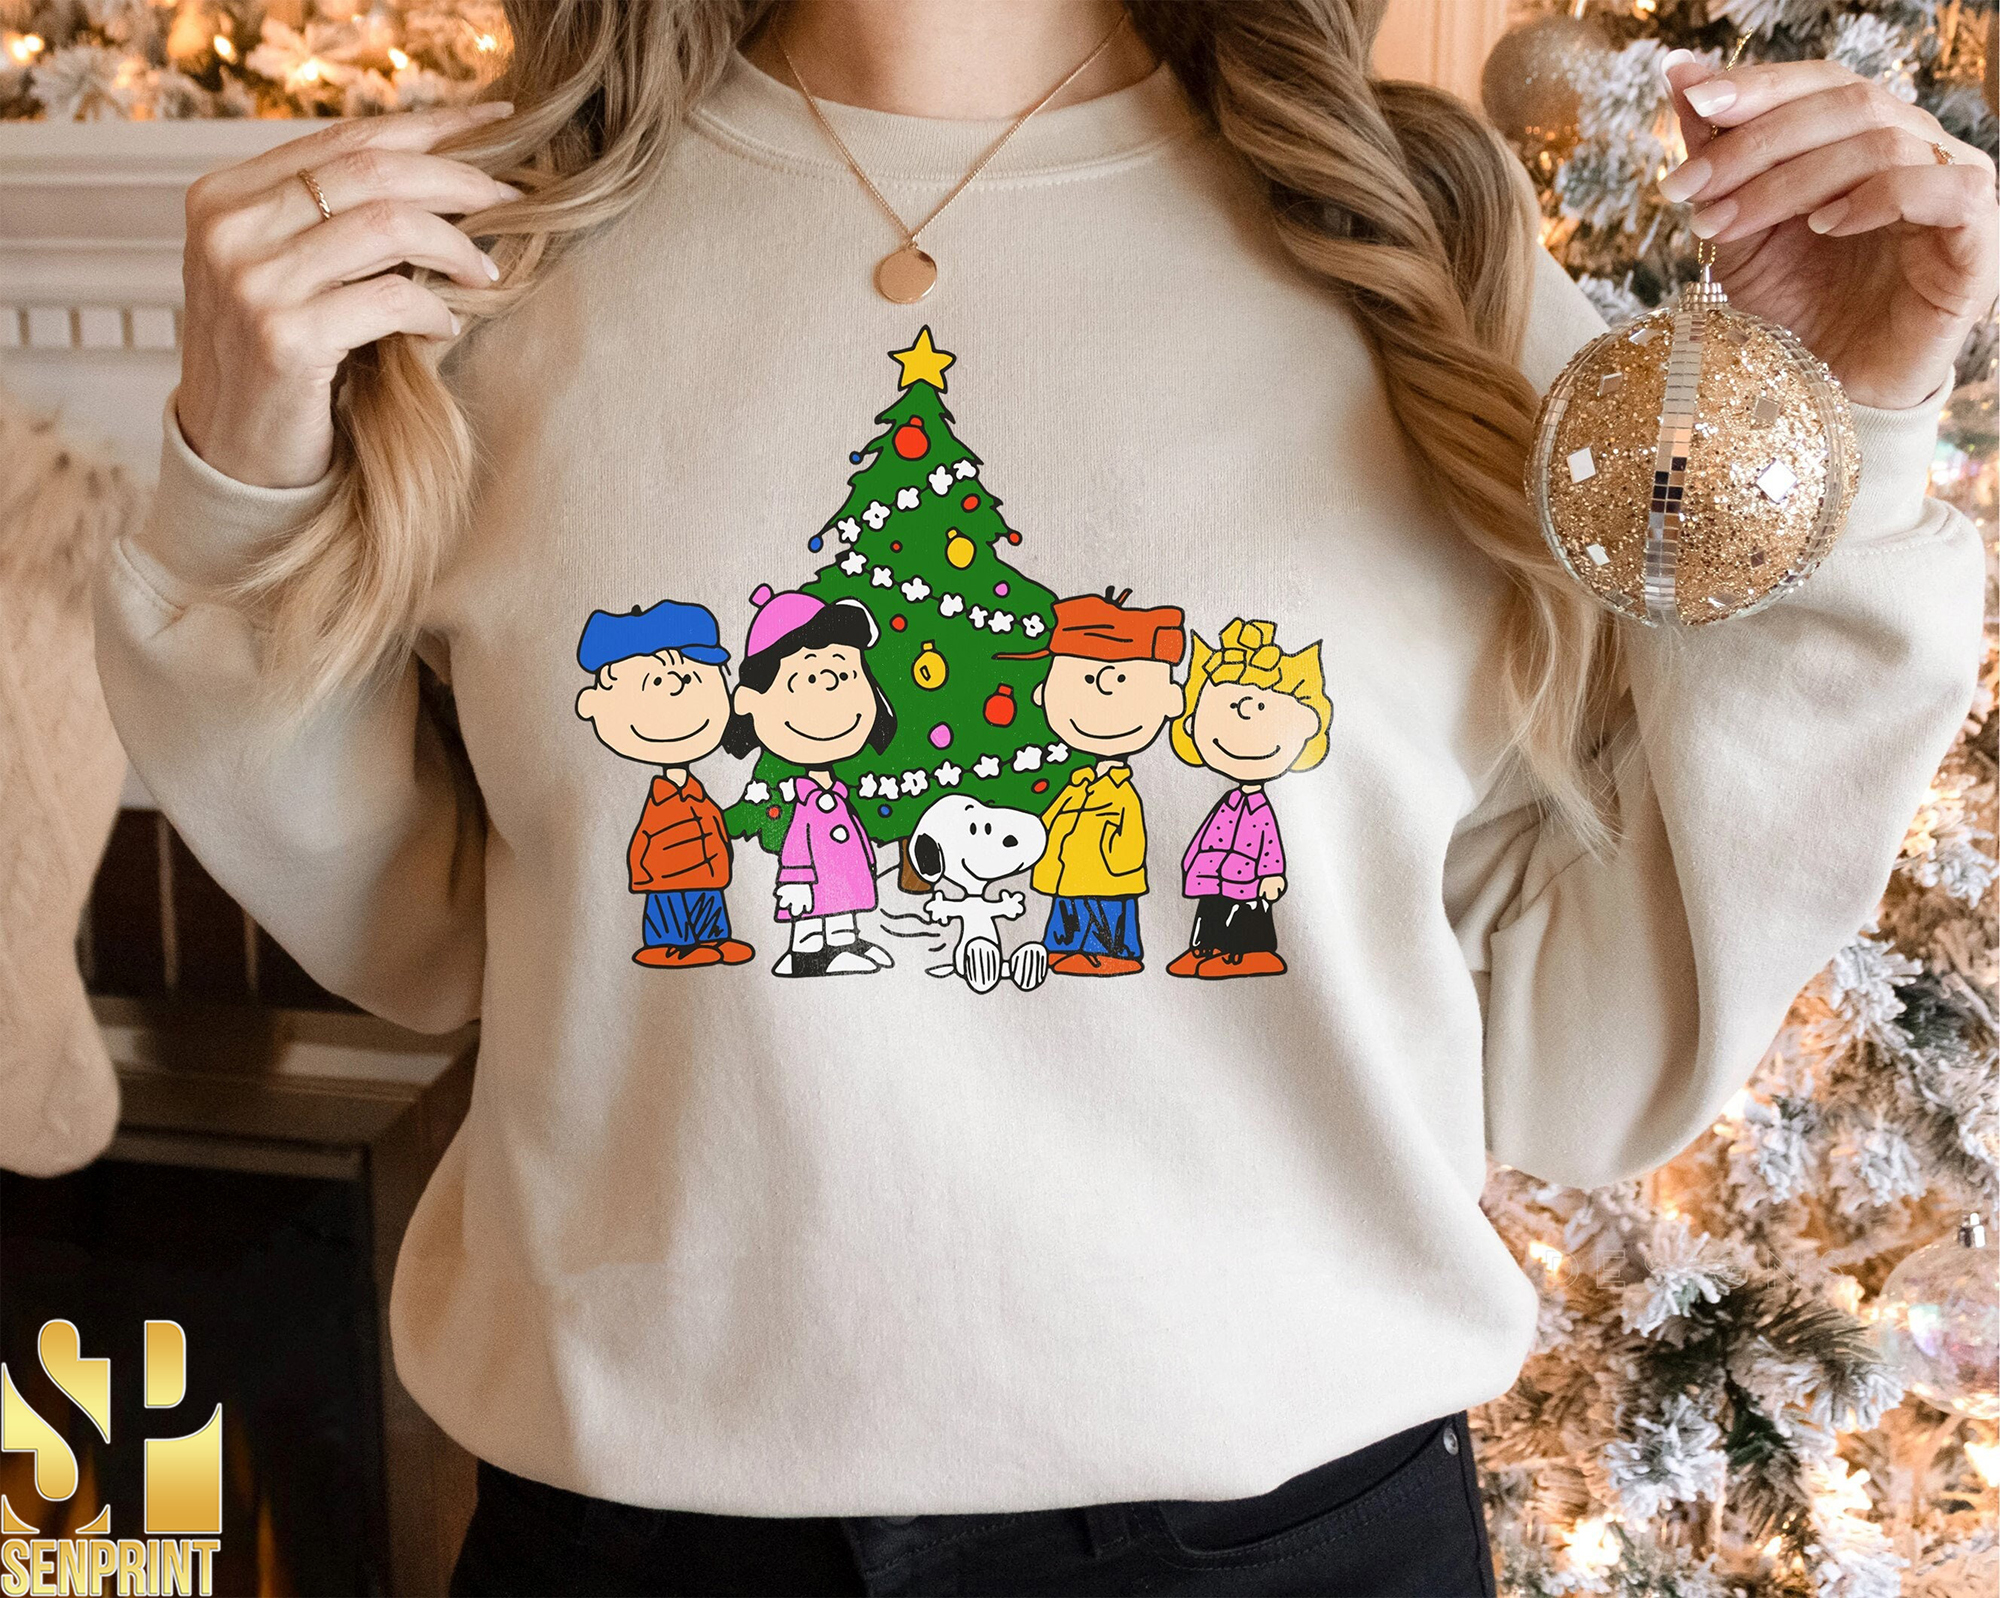 Bringing Joy to the Holidays The Charm of Charlie Brown Christmas Sweaters!